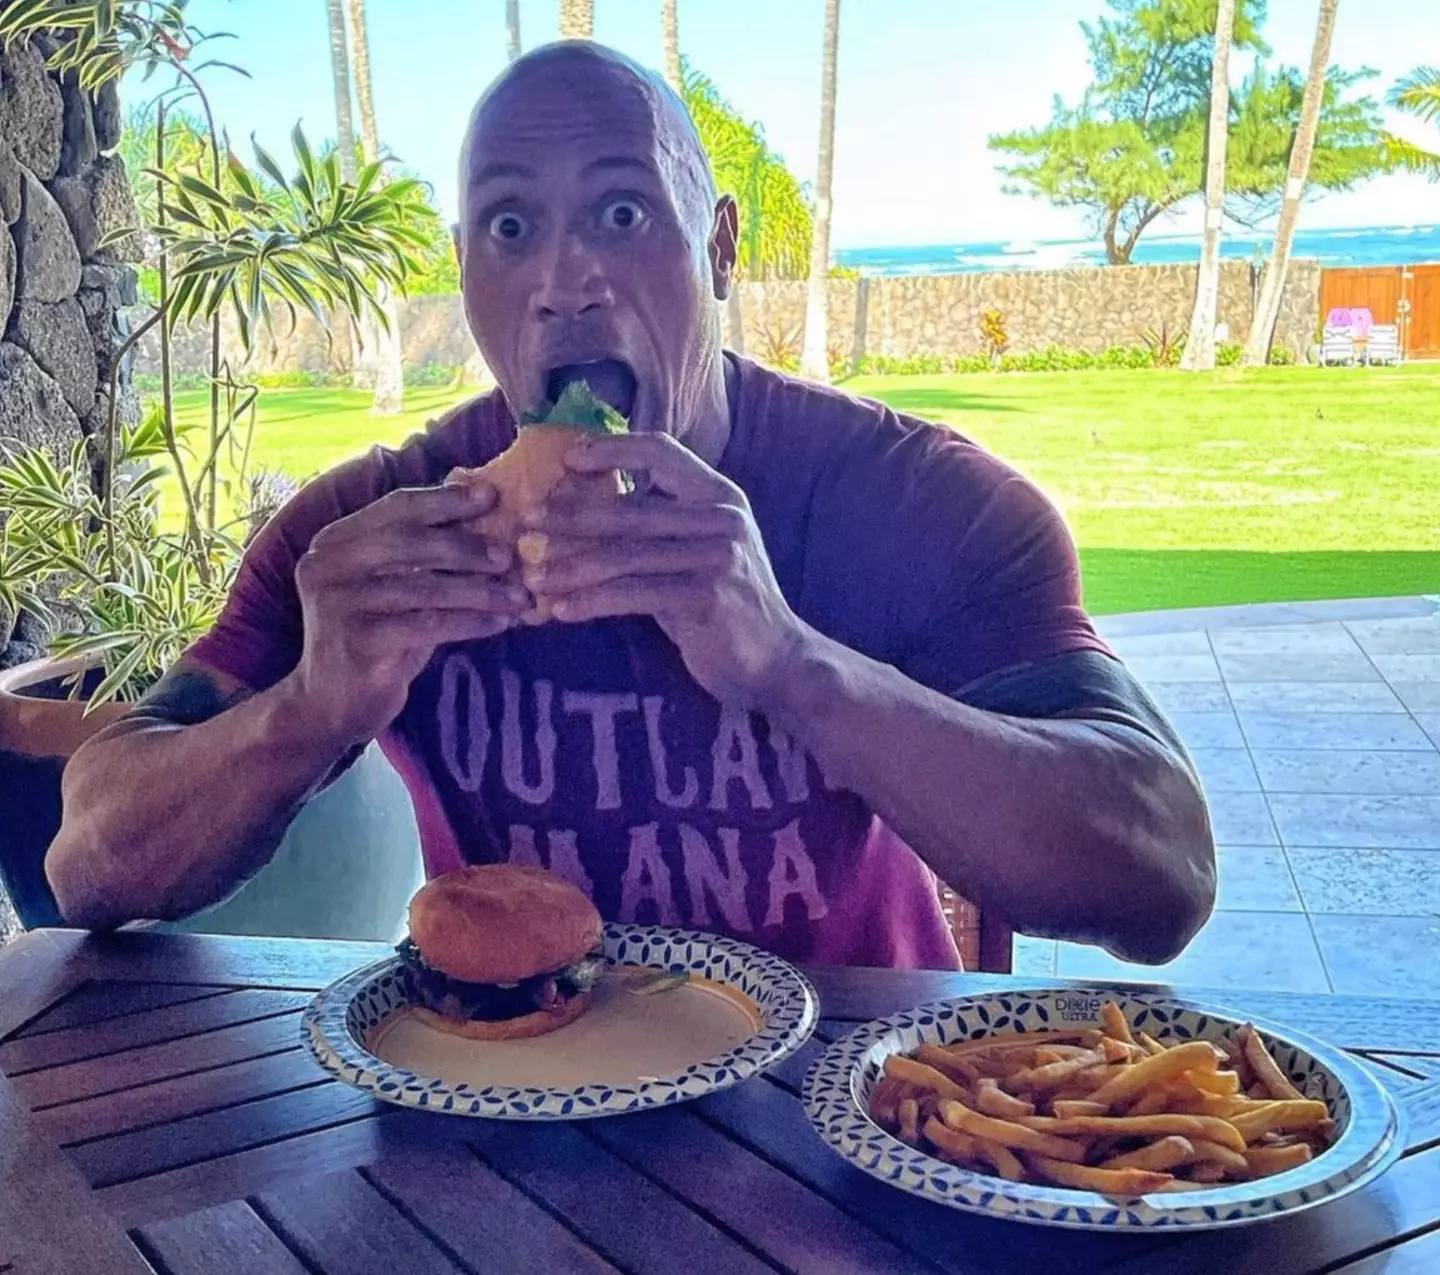 The Rock is known for having a huge appetite.